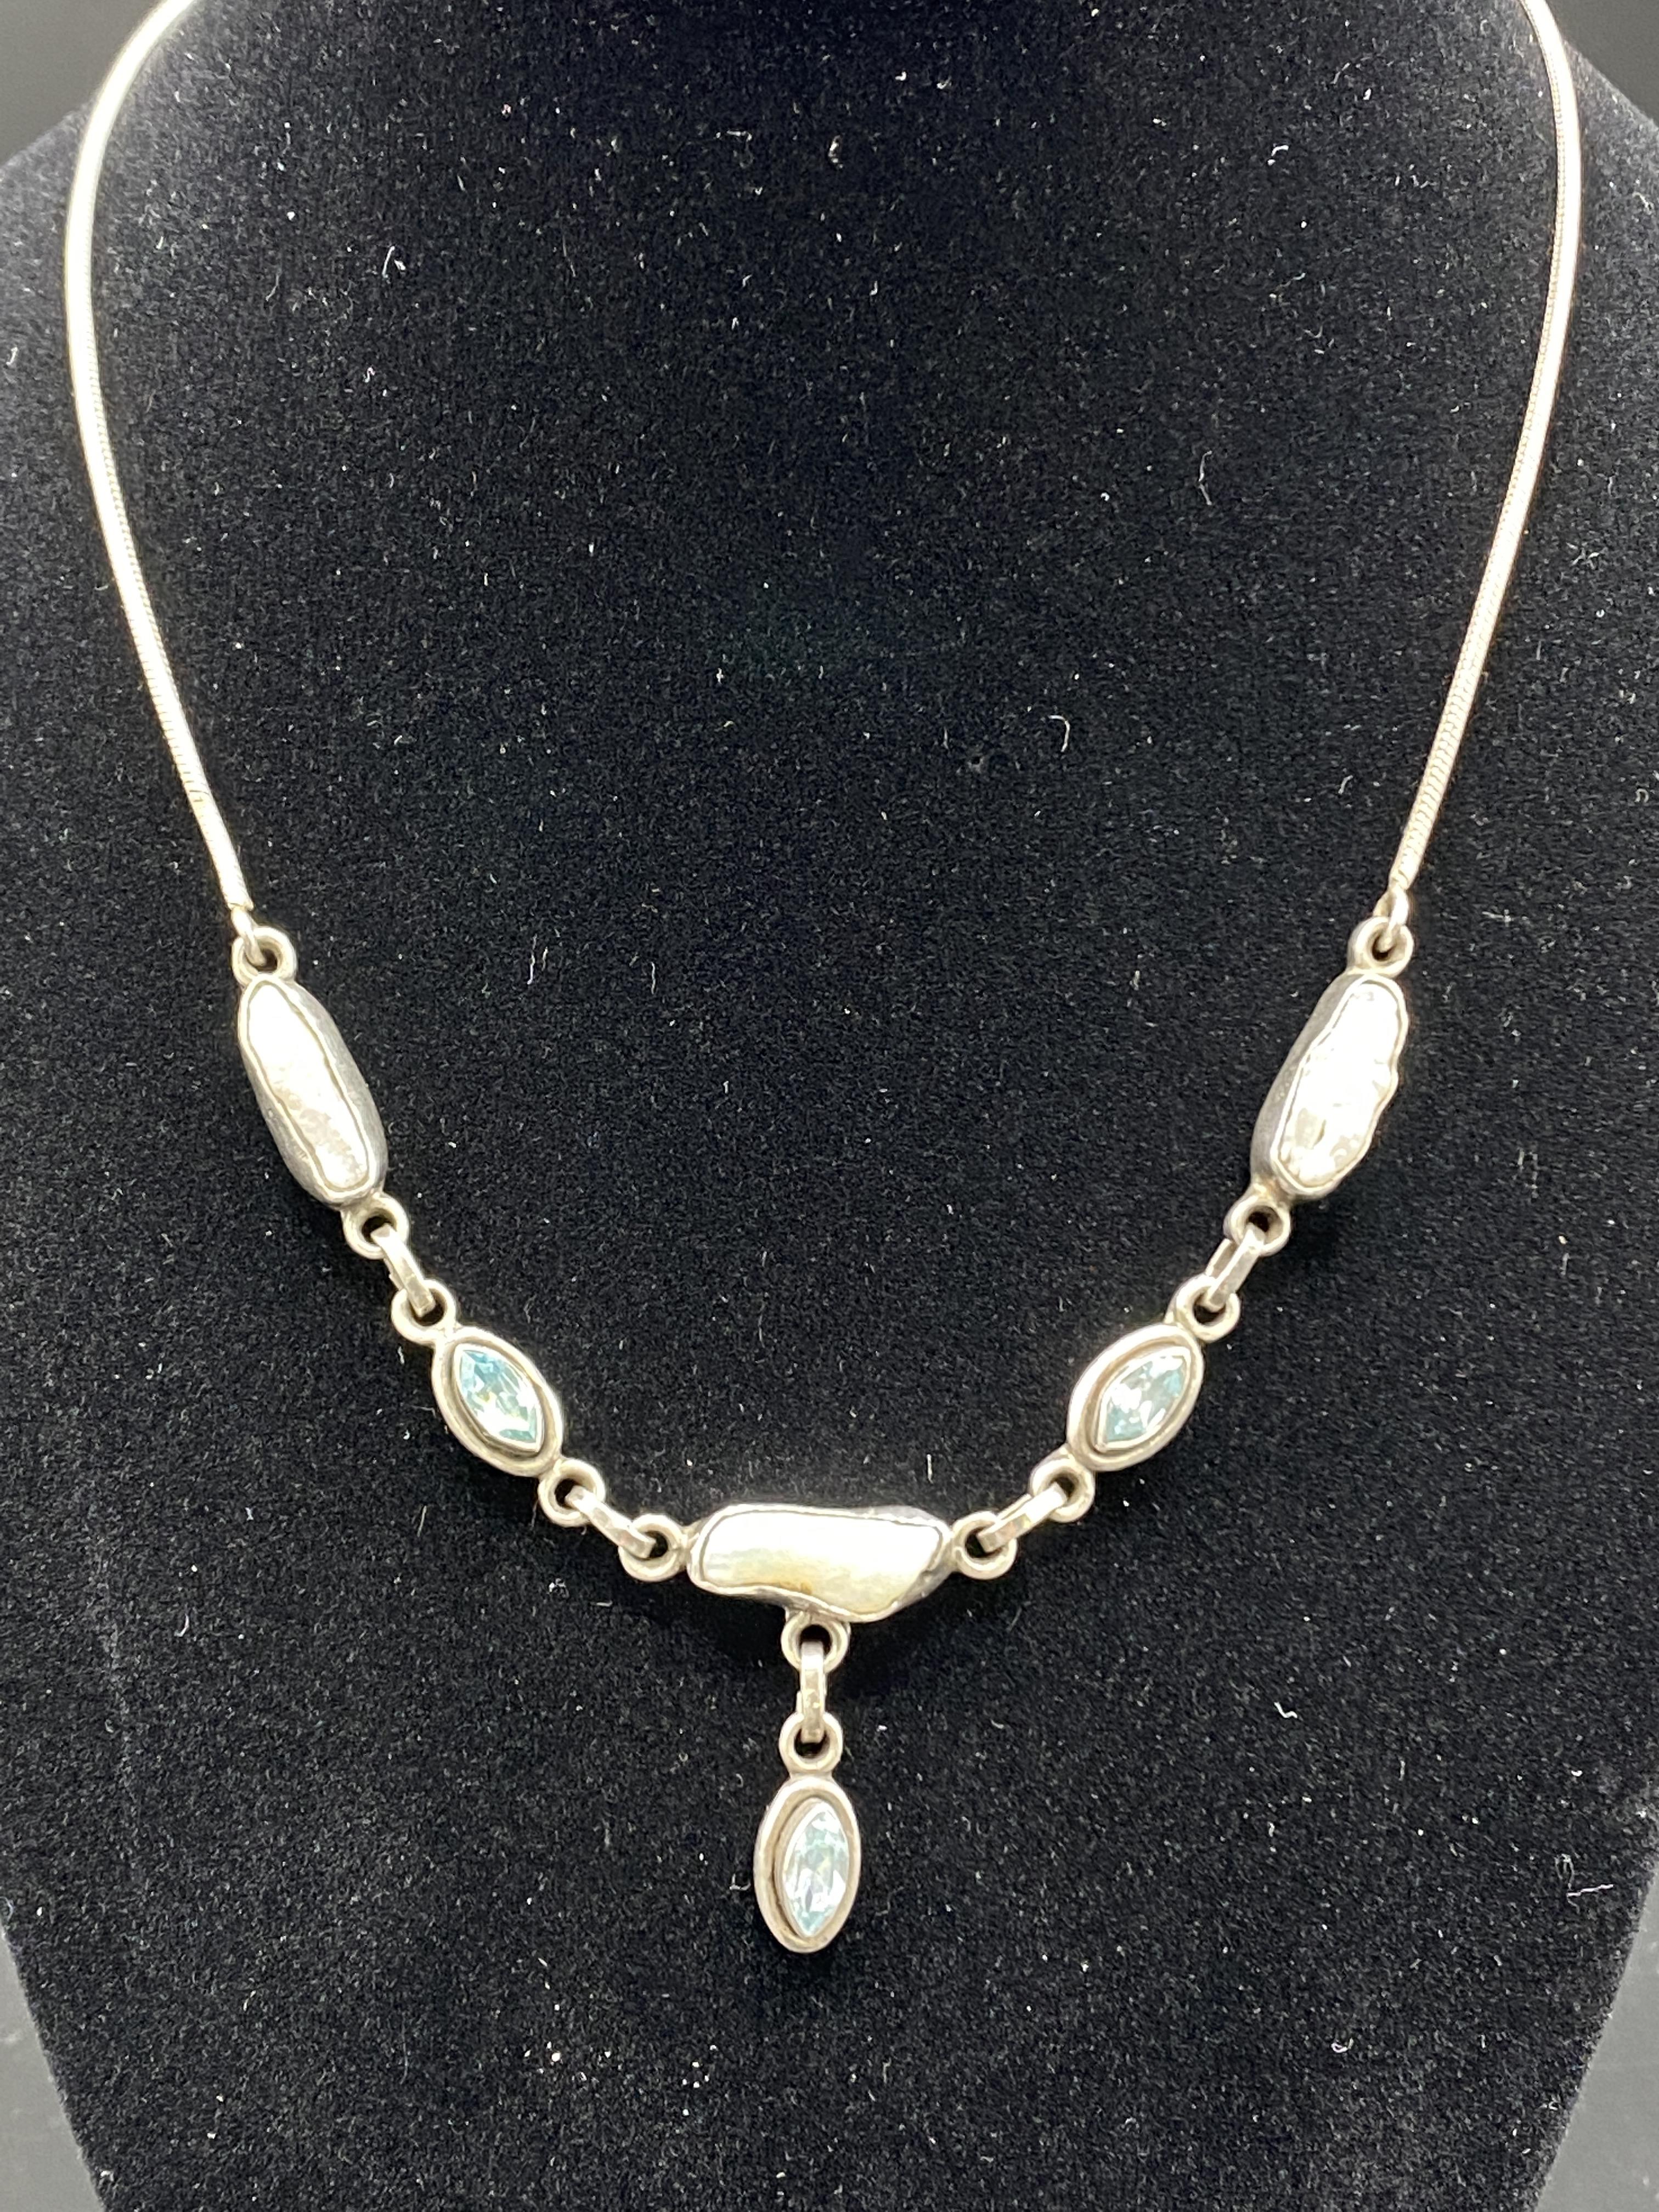 Silver necklace set with pearls - Image 2 of 4